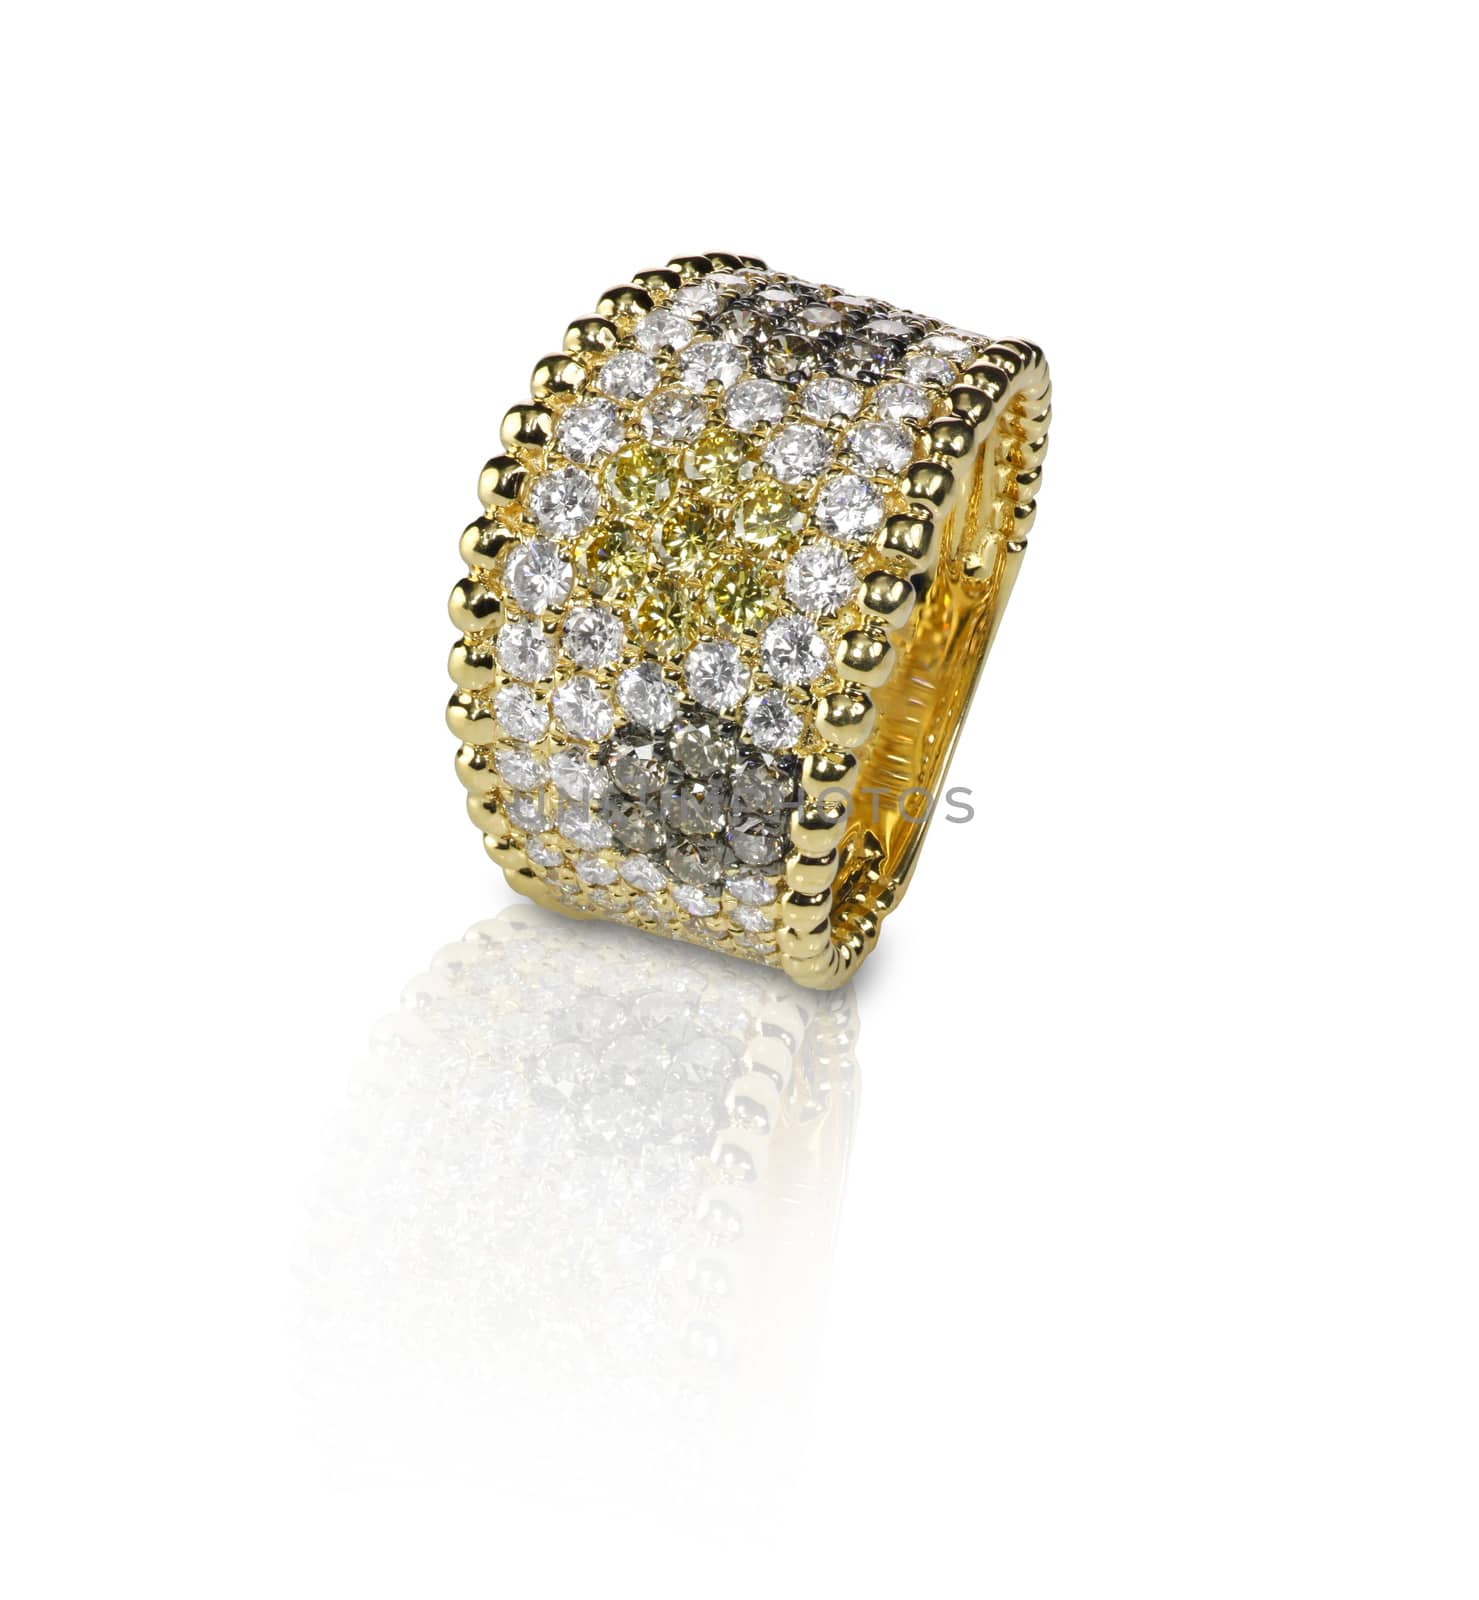 Fancy Colored diamond Pave ring with yellow brown and white ston by fruitcocktail